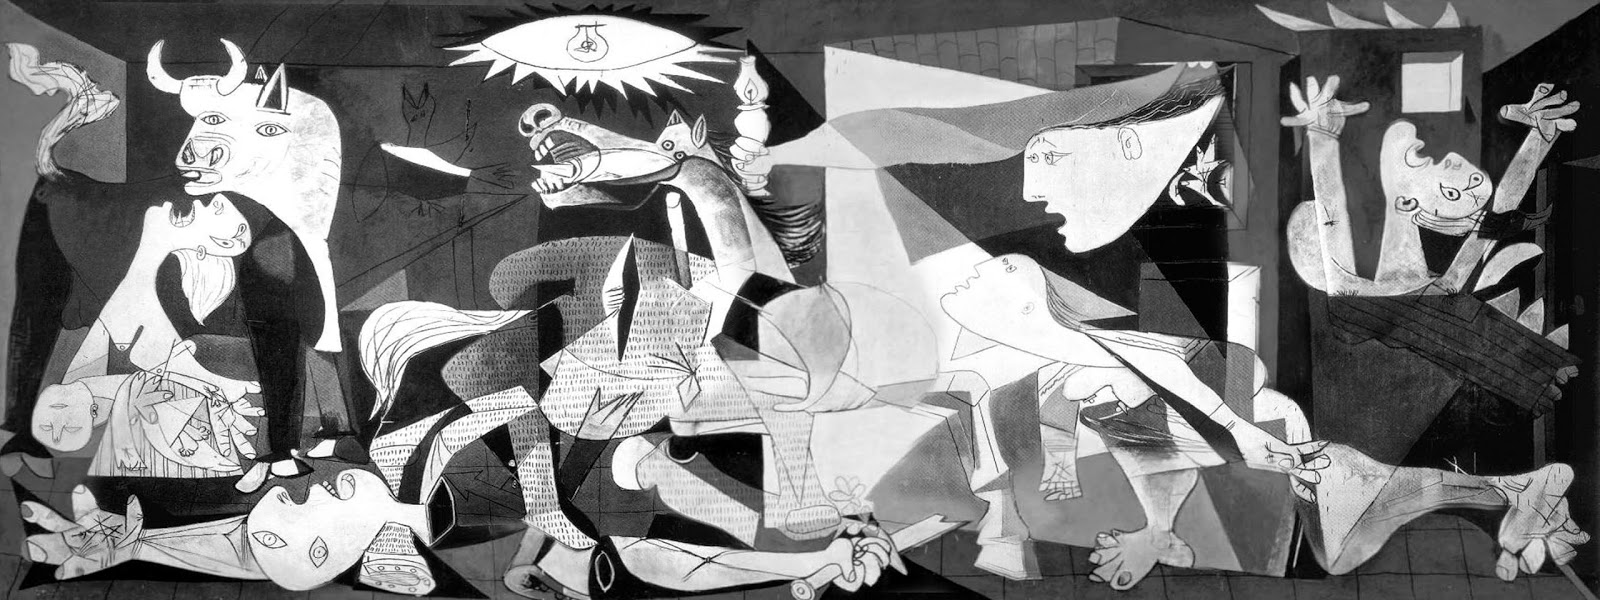 Can You Match These Famous Paintings to Their Legendary Creators? Guernica Painting By Pablo Picasso